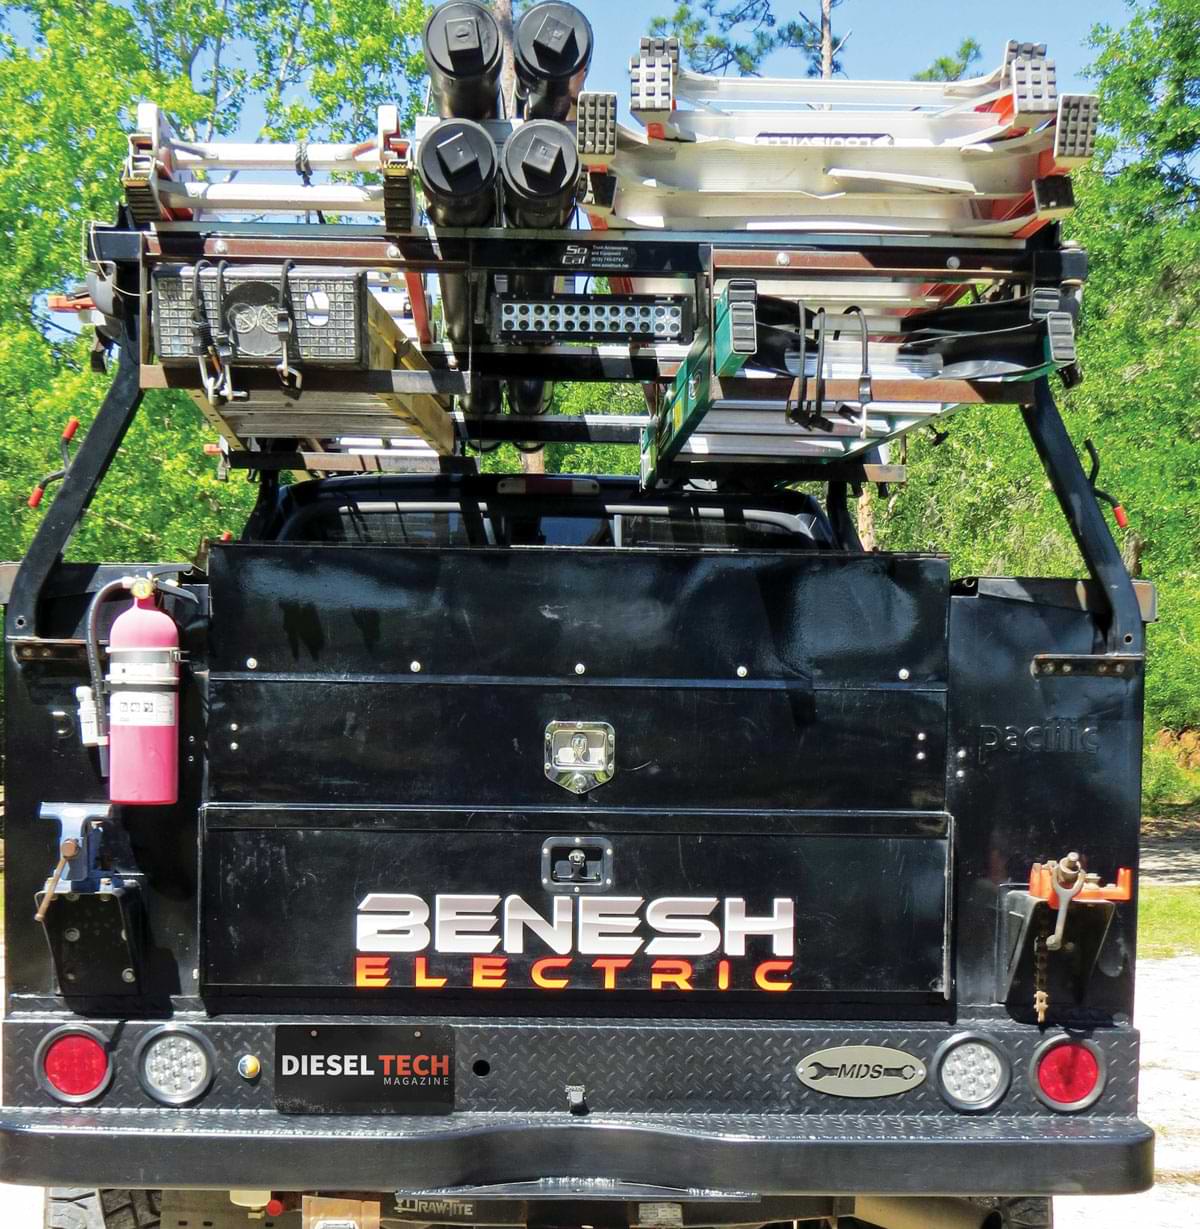 When this rig rolls away from the shop, there’s never a need to make a run back for something Benesh forgot with its two mounted vices, fire extinguisher, tube storage for conduit and easy access to various ladders